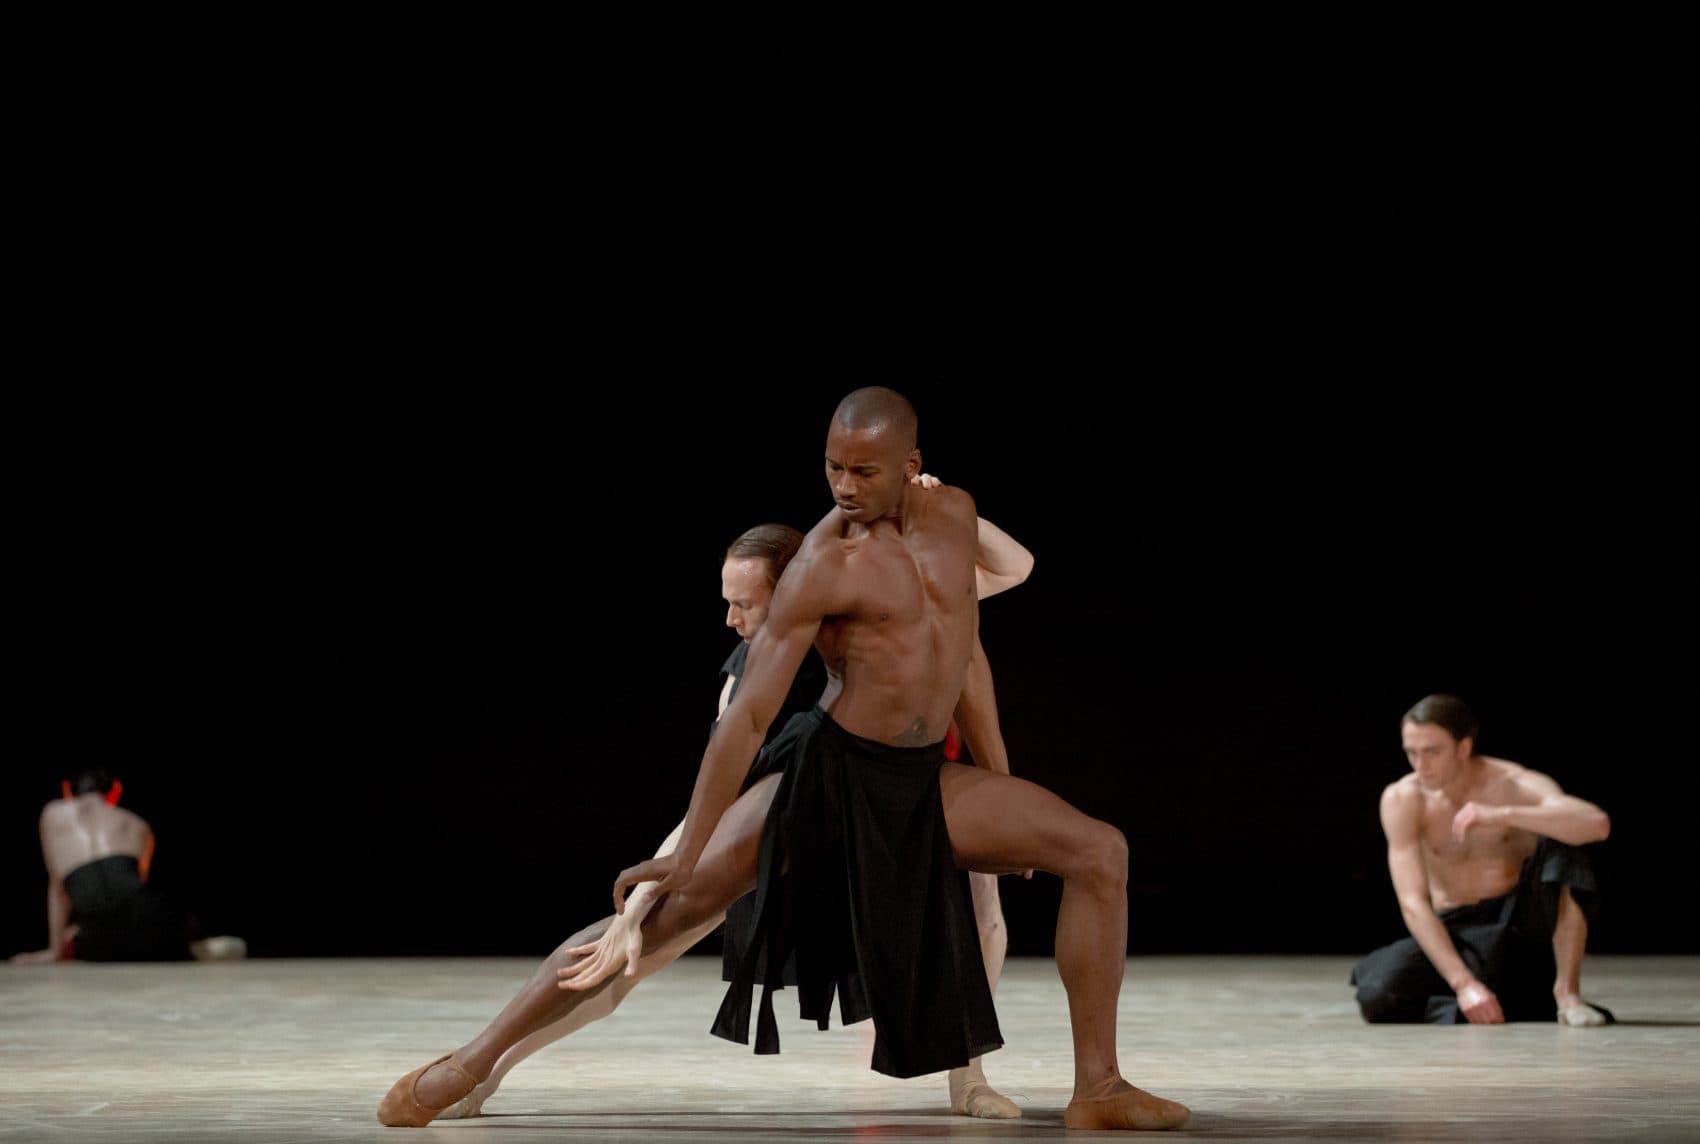 Royal Ballet principal dancer Edward Watson and soloist Eric Underwood in Wayne McGregor's &quot;Obsidian Tear,&quot; which is coming to Boston this season. (Courtesy Andrej Uspenski/The Royal Ballet)